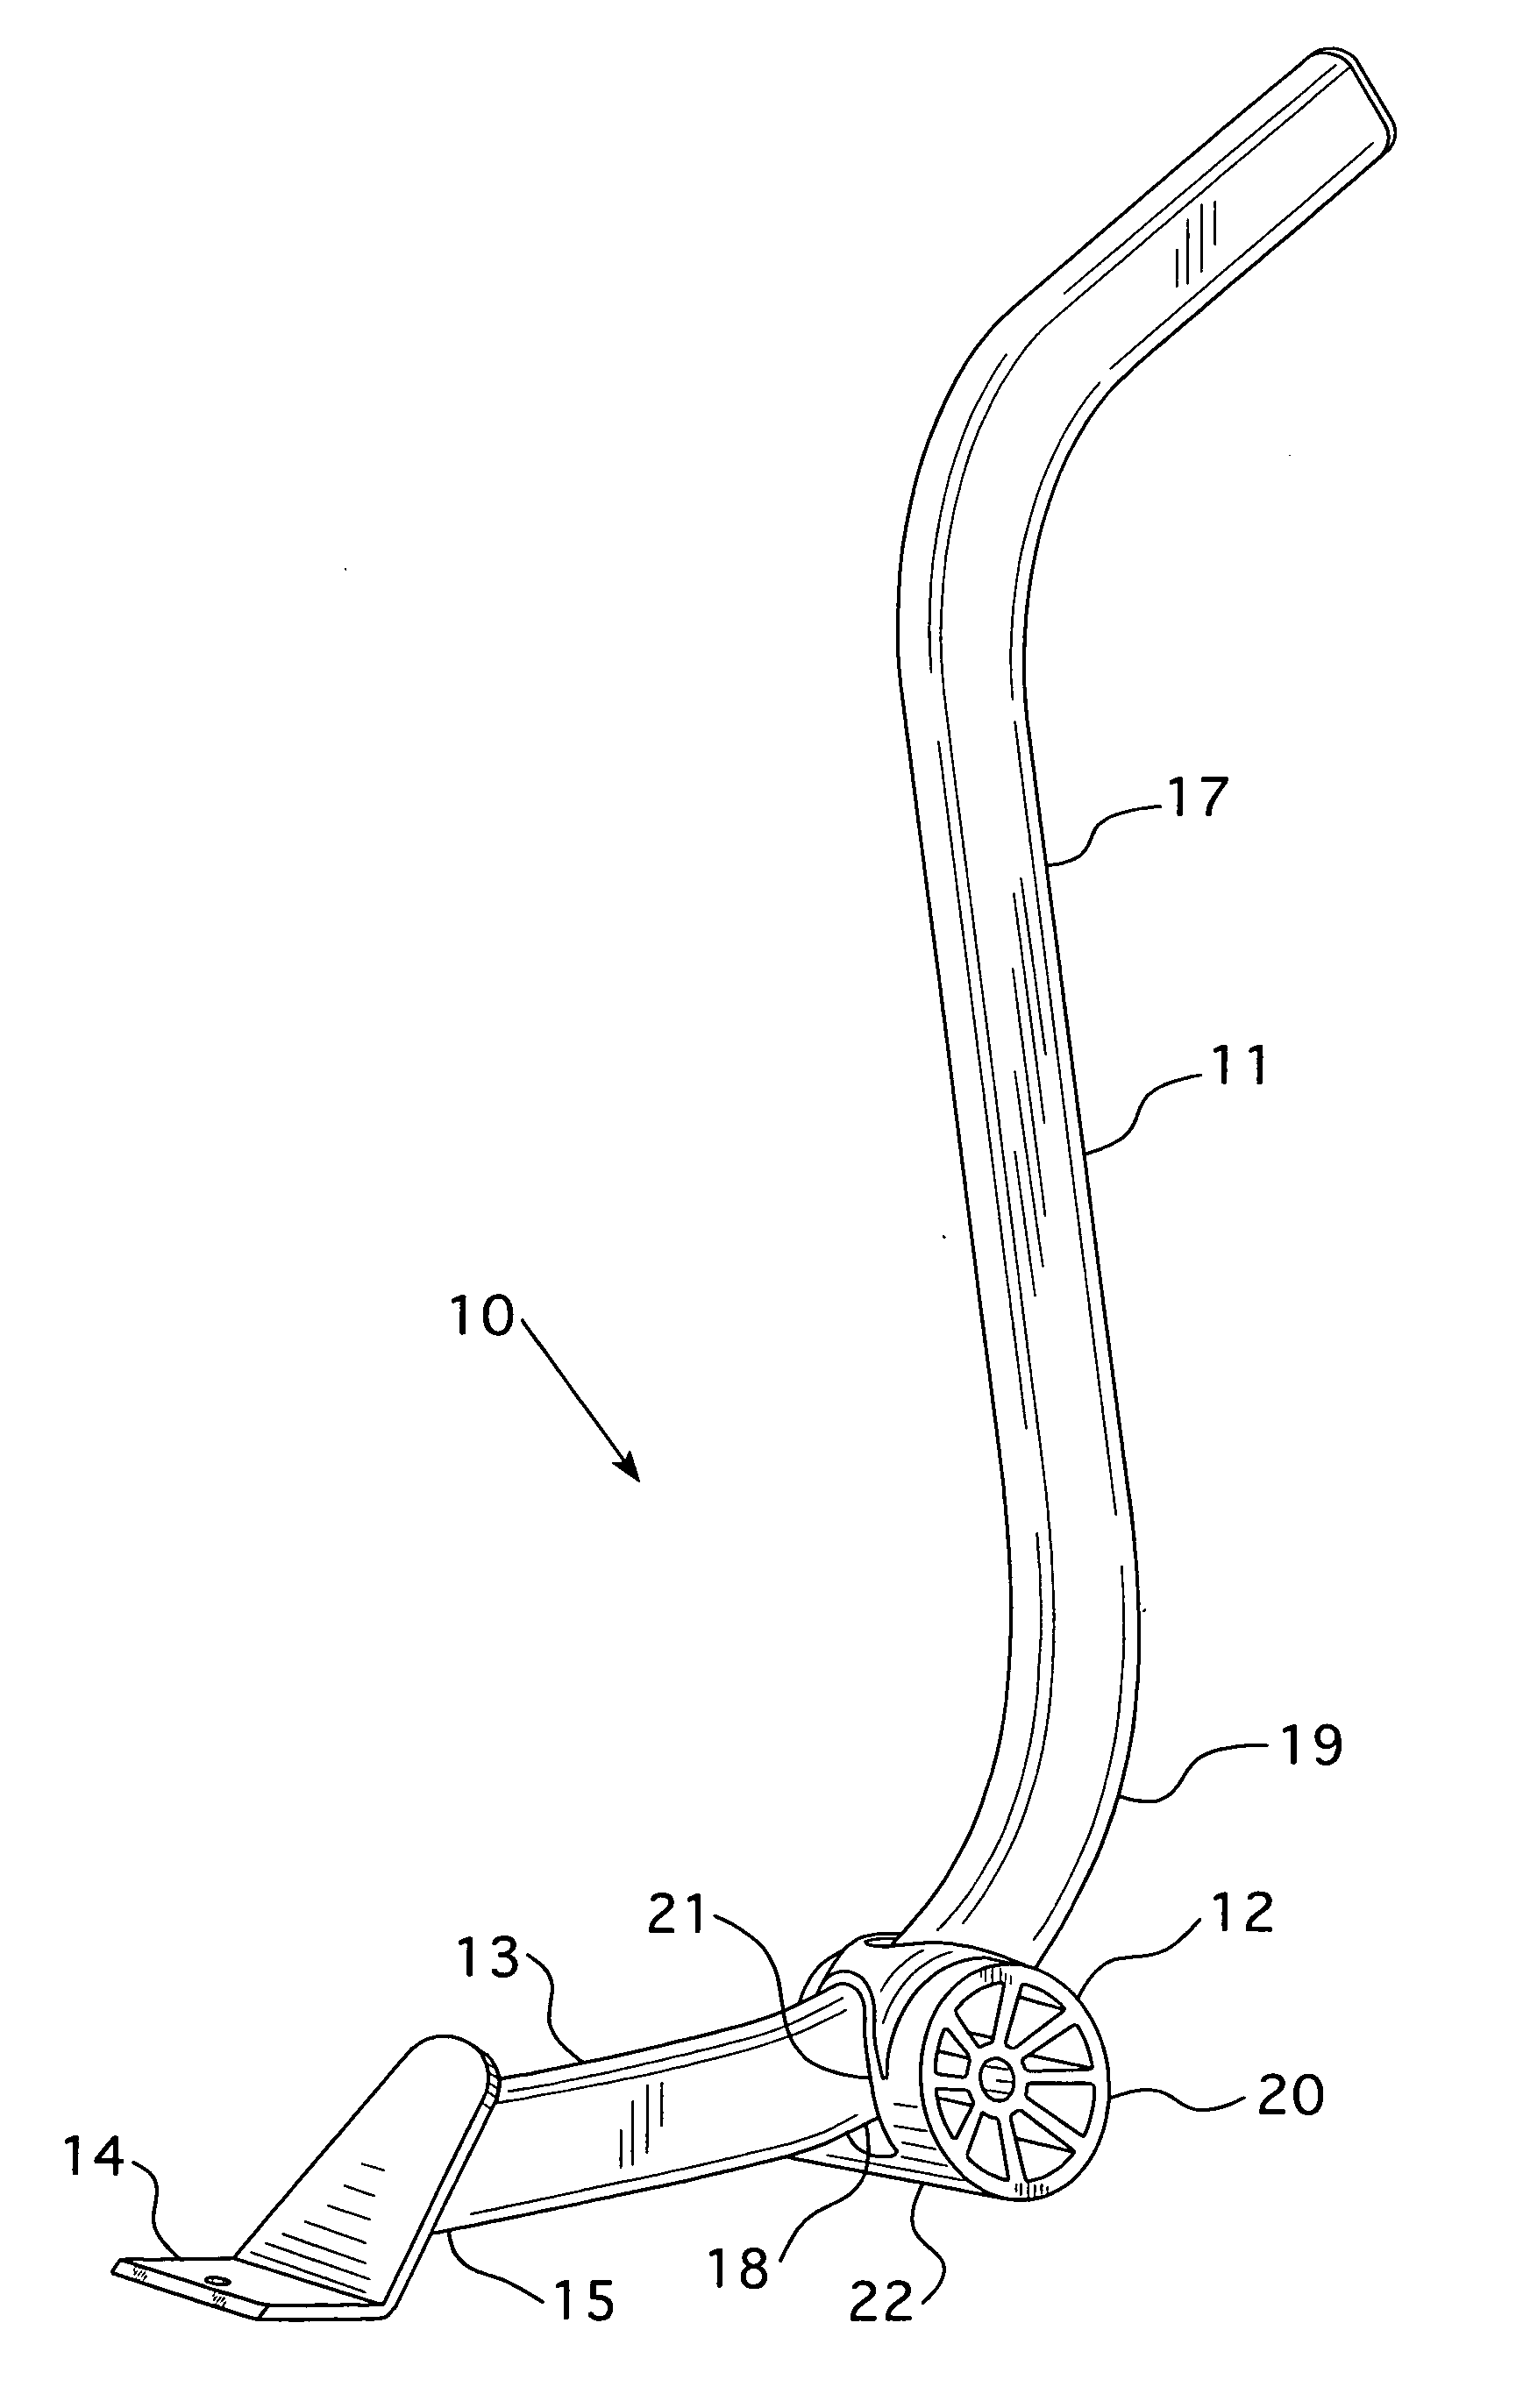 Pry bar with sliding fulcrum assembly